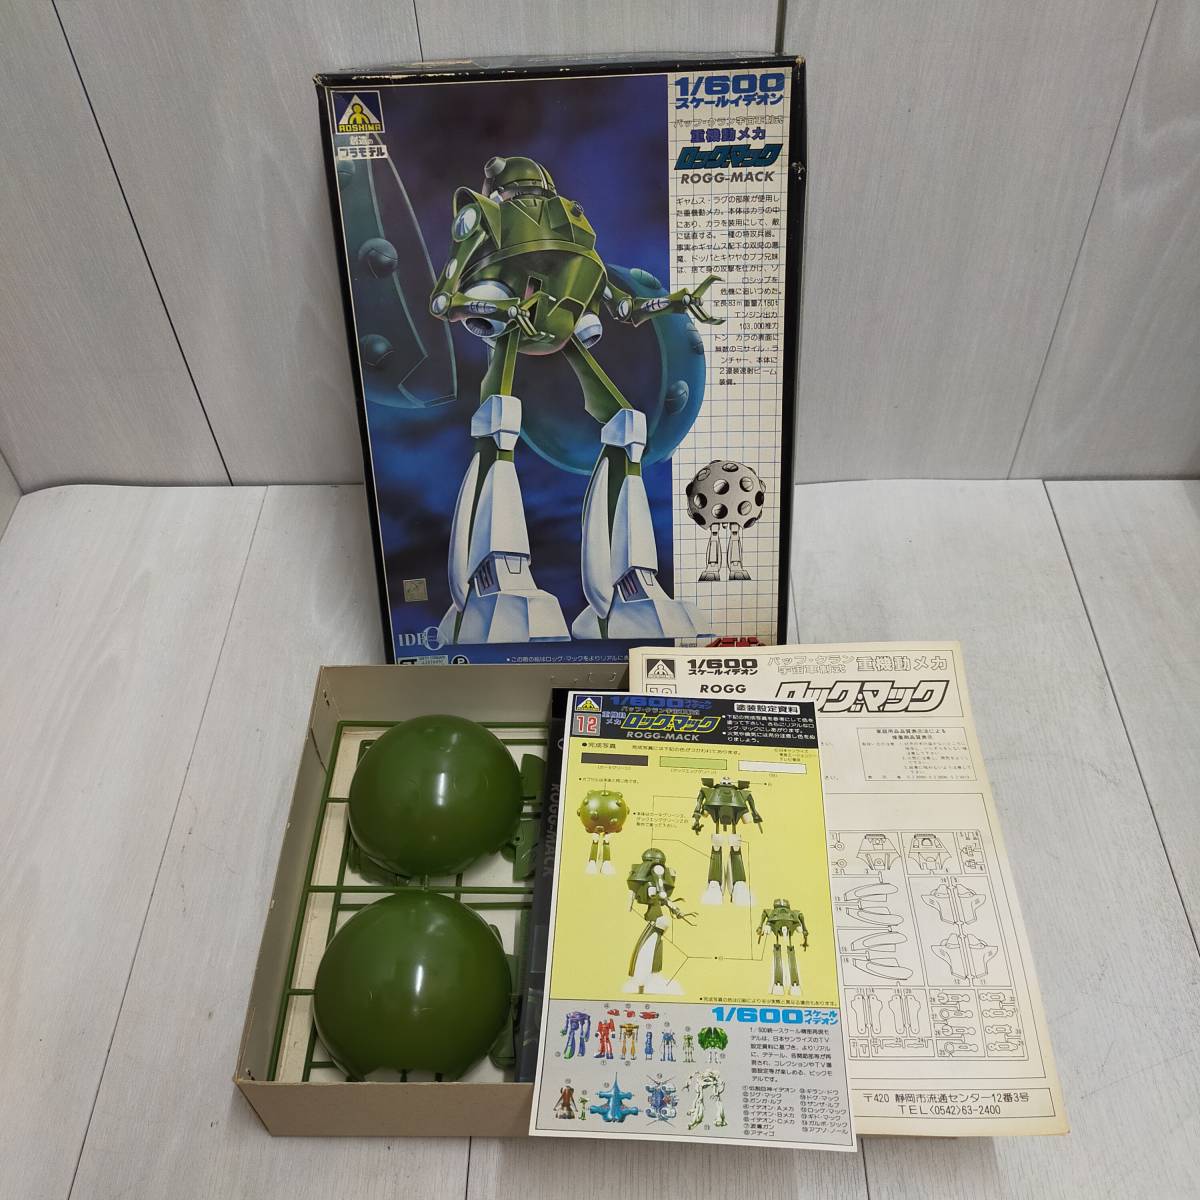 [ free shipping ] rare not yet constructed * Aoshima baf* Clan cosmos army system type heavy equipment moving me Caro g Mac 1/600 scale G2ite on plastic model model hobby 